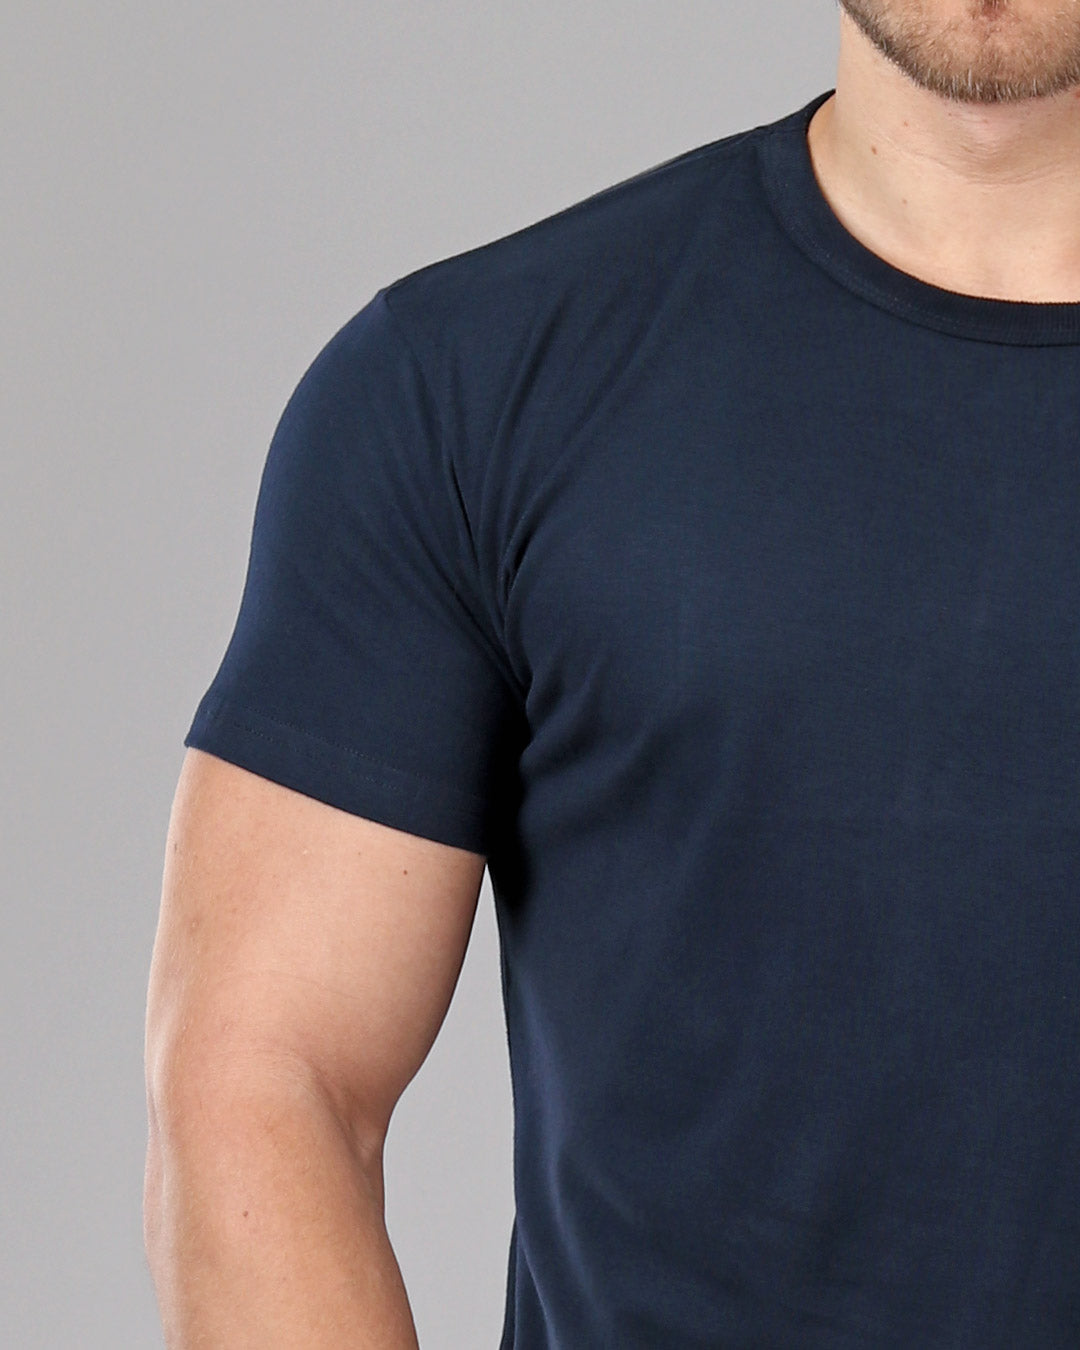 Men's Navy Crew Fitted Plain T-Shirt Muscle